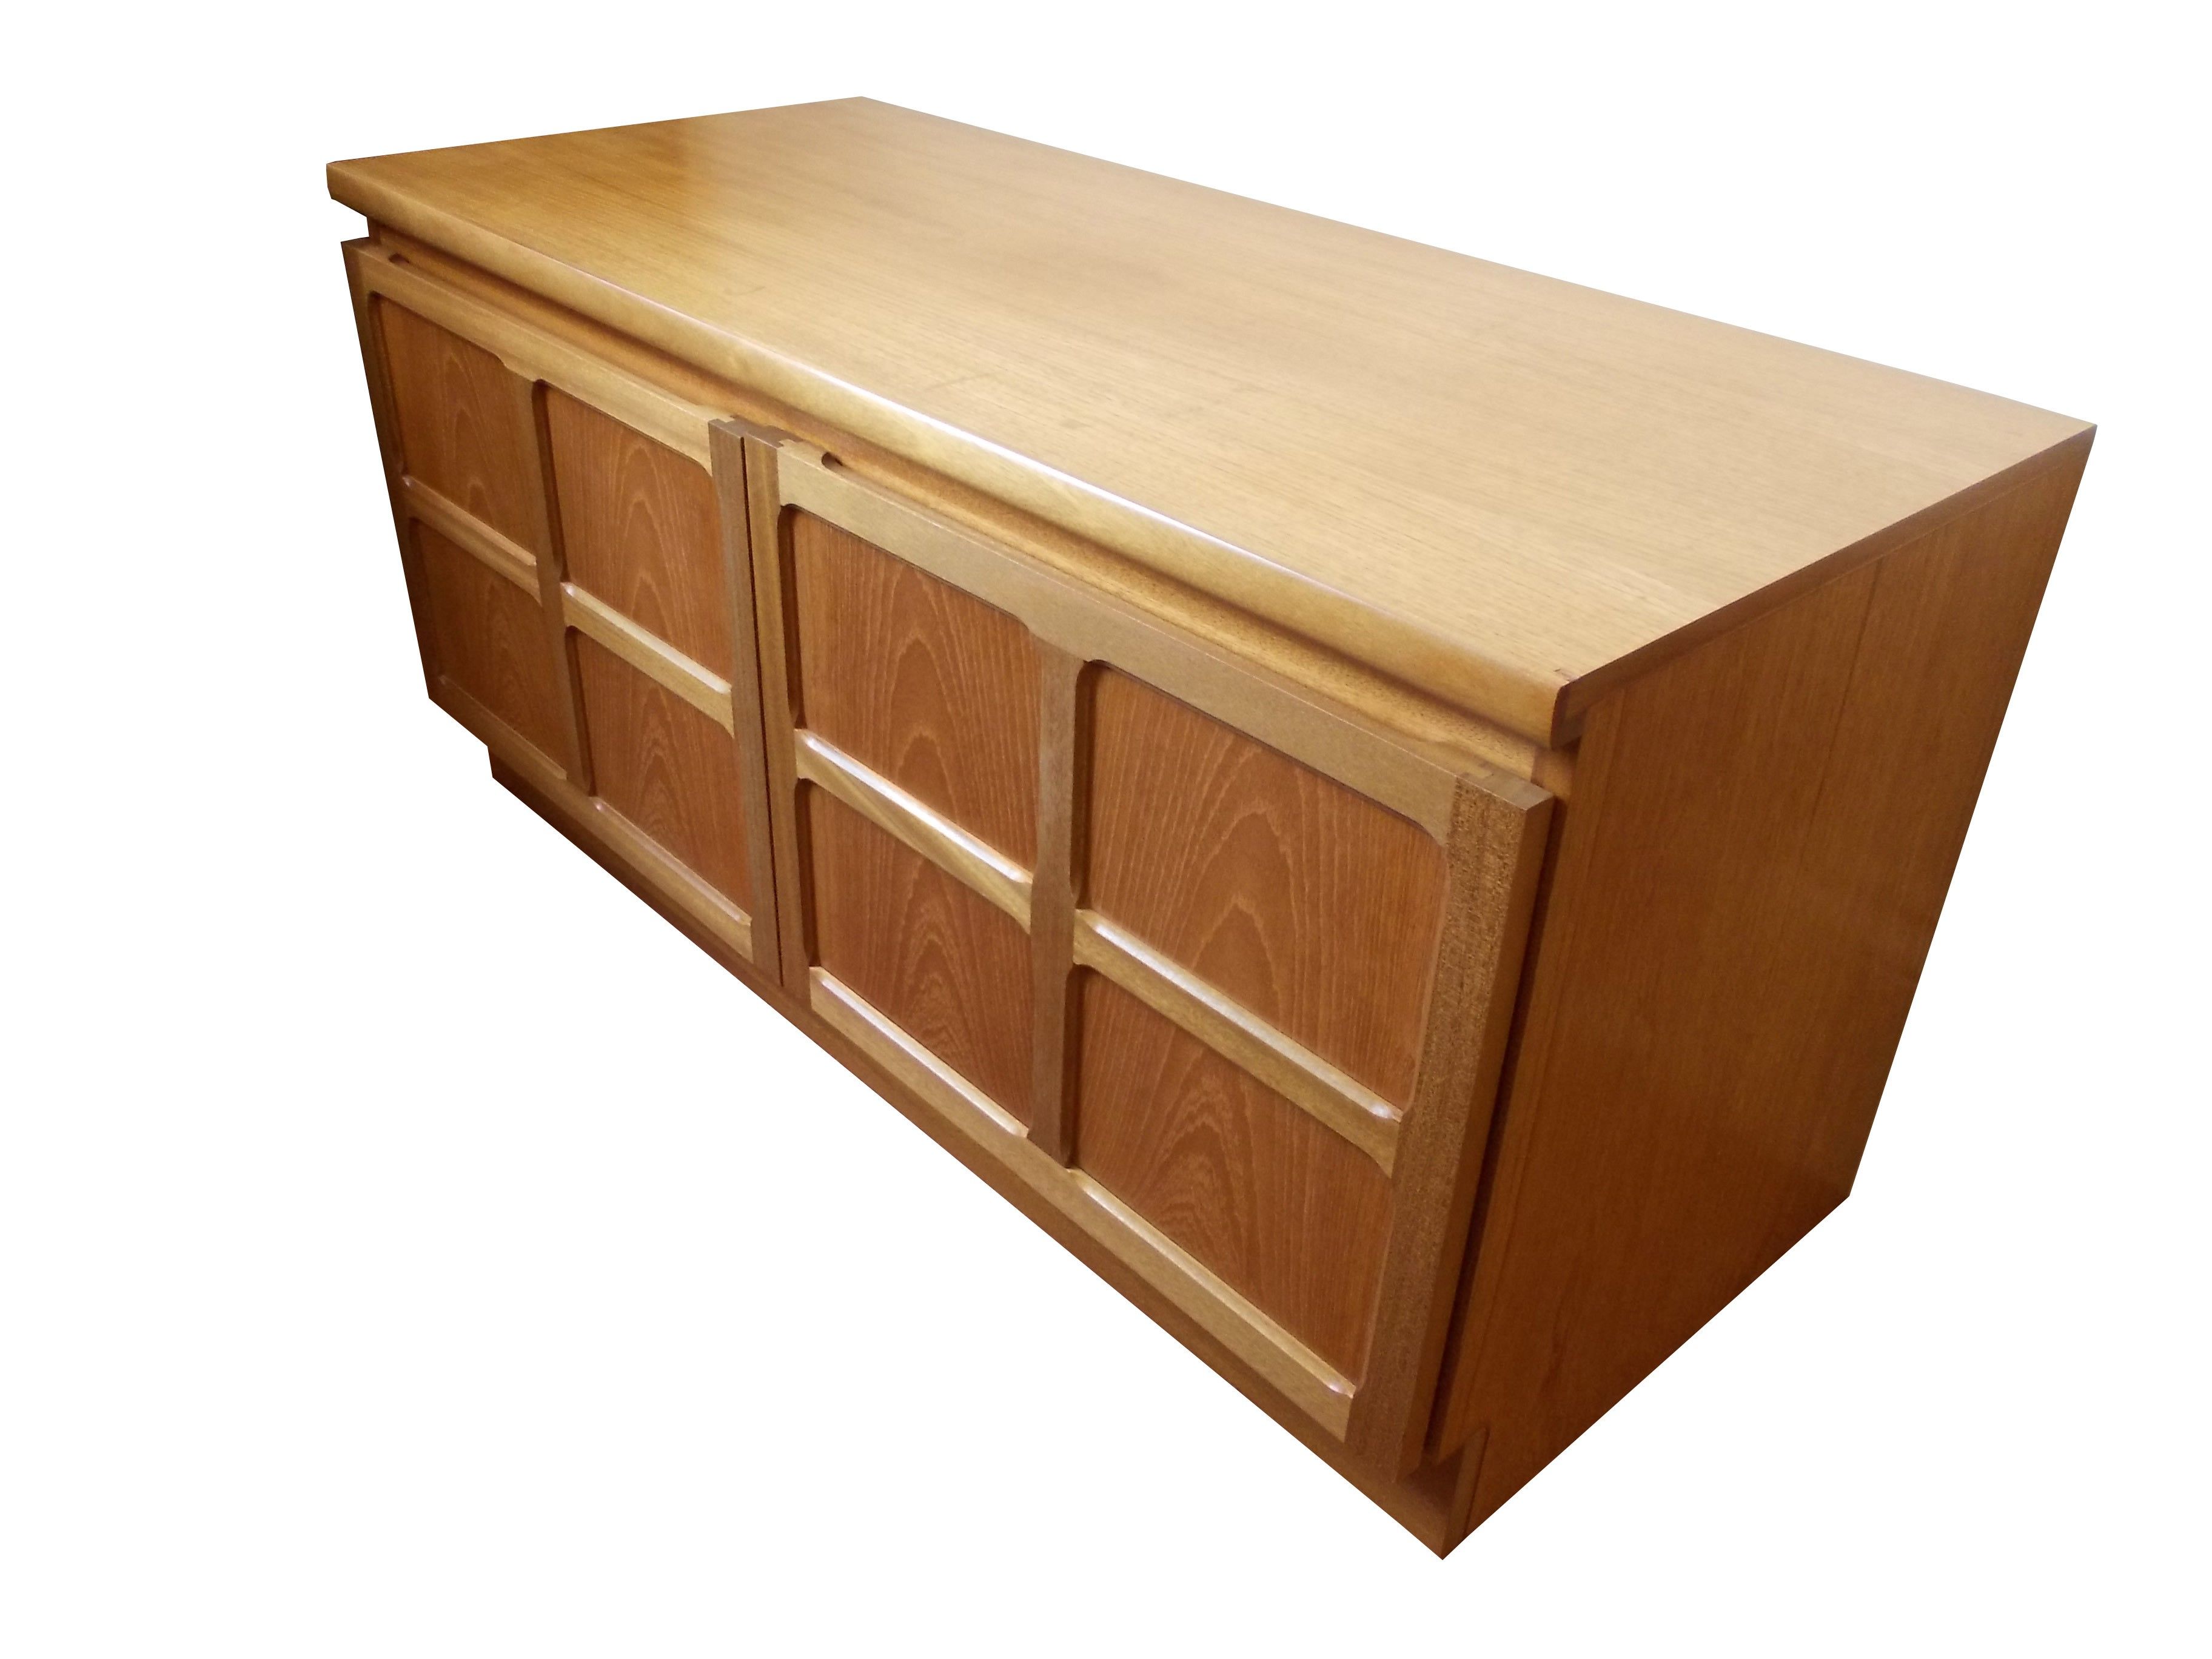 Widely Used Gosport Sideboards In From The Gosport Furniture Shop Ltd (View 19 of 20)